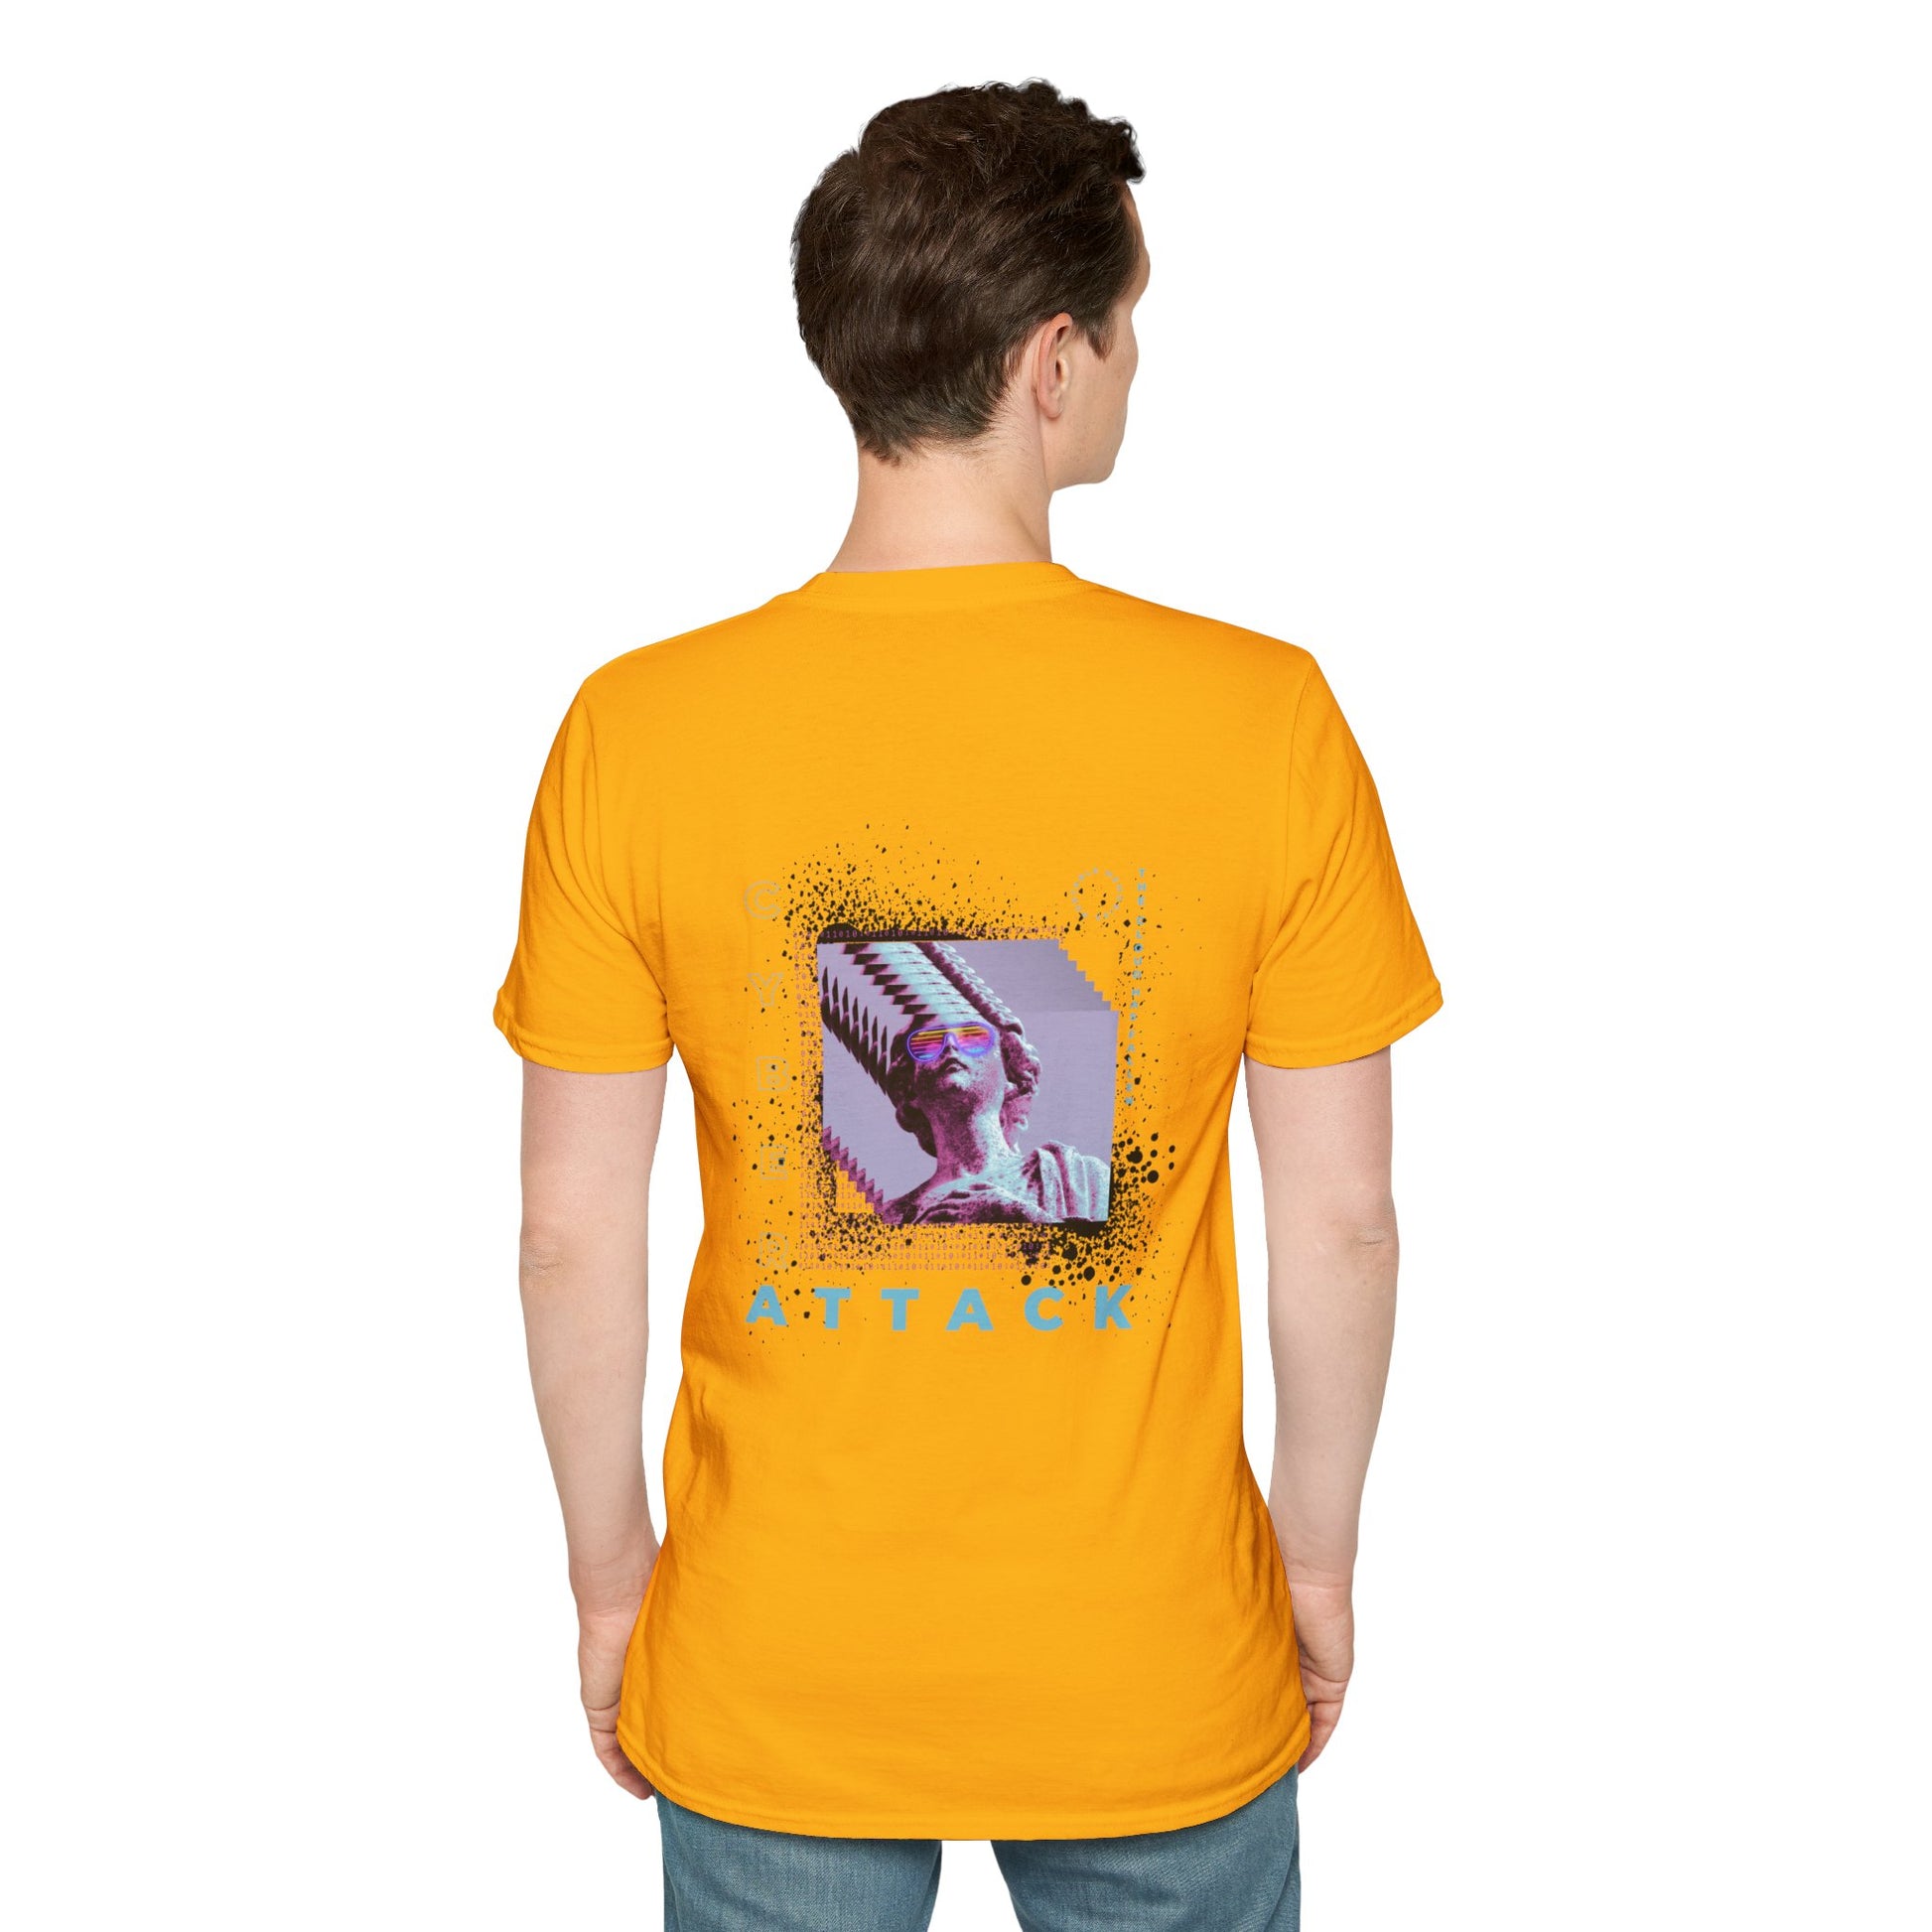 Yellow T-shirt with a pixelated Statue of Liberty and modern glitch art design